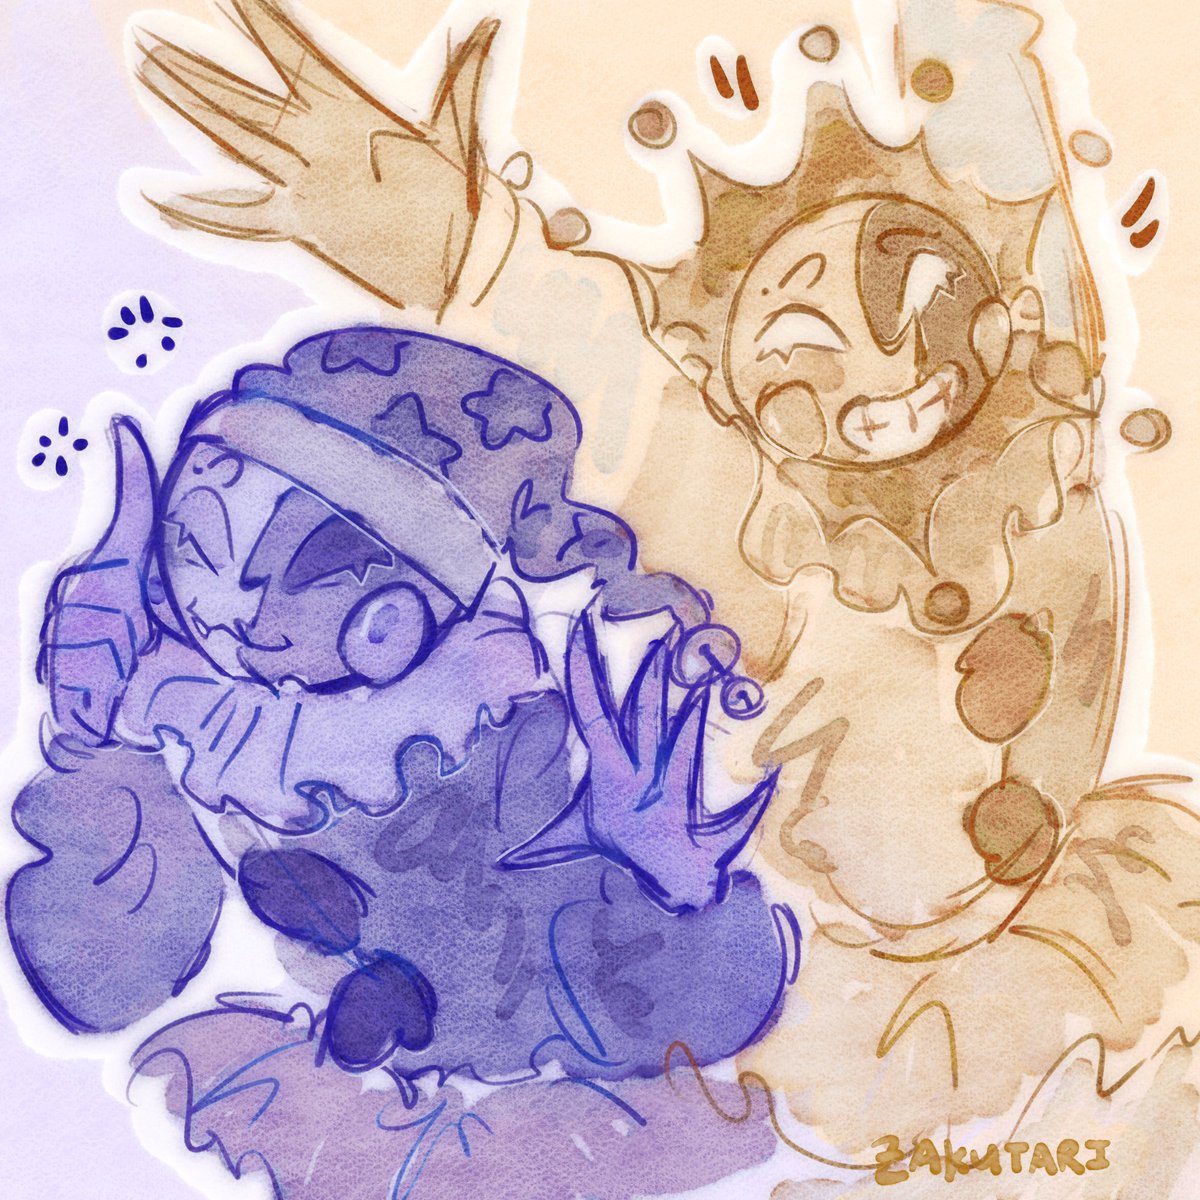 HELLO THEYRE SO CUTE i had to do a quick (experimental-ish) doodle of these ☀️🌙
#fnaf #securitybreach #sunandmoon #fanart